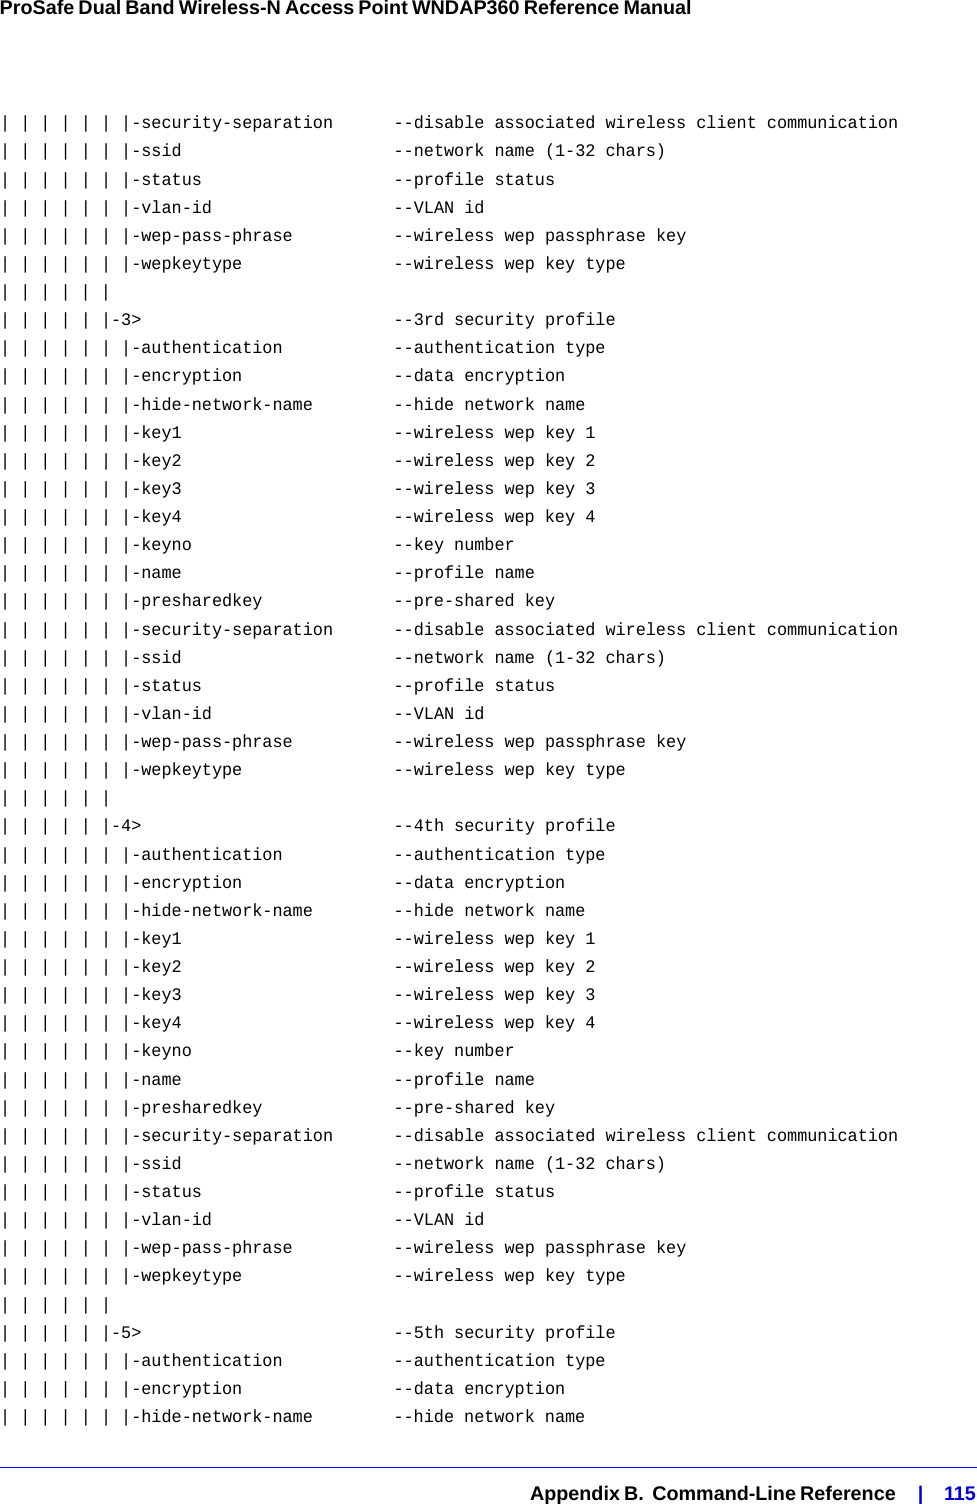   Appendix B.  Command-Line Reference    |    115ProSafe Dual Band Wireless-N Access Point WNDAP360 Reference Manual | | | | | | |-security-separation      --disable associated wireless client communication| | | | | | |-ssid                     --network name (1-32 chars)| | | | | | |-status                   --profile status                                  | | | | | | |-vlan-id                  --VLAN id| | | | | | |-wep-pass-phrase          --wireless wep passphrase key| | | | | | |-wepkeytype               --wireless wep key type                           | | | | | |                                                                      | | | | | |-3&gt;                         --3rd security profile                            | | | | | | |-authentication           --authentication type                             | | | | | | |-encryption               --data encryption| | | | | | |-hide-network-name        --hide network name                               | | | | | | |-key1                     --wireless wep key 1                              | | | | | | |-key2                     --wireless wep key 2                              | | | | | | |-key3                     --wireless wep key 3                              | | | | | | |-key4                     --wireless wep key 4                              | | | | | | |-keyno                    --key number | | | | | | |-name                     --profile name| | | | | | |-presharedkey             --pre-shared key | | | | | | |-security-separation      --disable associated wireless client communication| | | | | | |-ssid                     --network name (1-32 chars)| | | | | | |-status                   --profile status                                  | | | | | | |-vlan-id                  --VLAN id| | | | | | |-wep-pass-phrase          --wireless wep passphrase key| | | | | | |-wepkeytype               --wireless wep key type                           | | | | | |                                                                      | | | | | |-4&gt;                         --4th security profile                            | | | | | | |-authentication           --authentication type                             | | | | | | |-encryption               --data encryption| | | | | | |-hide-network-name        --hide network name                               | | | | | | |-key1                     --wireless wep key 1                              | | | | | | |-key2                     --wireless wep key 2                              | | | | | | |-key3                     --wireless wep key 3                              | | | | | | |-key4                     --wireless wep key 4                              | | | | | | |-keyno                    --key number | | | | | | |-name                     --profile name| | | | | | |-presharedkey             --pre-shared key | | | | | | |-security-separation      --disable associated wireless client communication| | | | | | |-ssid                     --network name (1-32 chars)| | | | | | |-status                   --profile status                                  | | | | | | |-vlan-id                  --VLAN id| | | | | | |-wep-pass-phrase          --wireless wep passphrase key| | | | | | |-wepkeytype               --wireless wep key type                           | | | | | |                                                                      | | | | | |-5&gt;                         --5th security profile                            | | | | | | |-authentication           --authentication type                             | | | | | | |-encryption               --data encryption| | | | | | |-hide-network-name        --hide network name                               